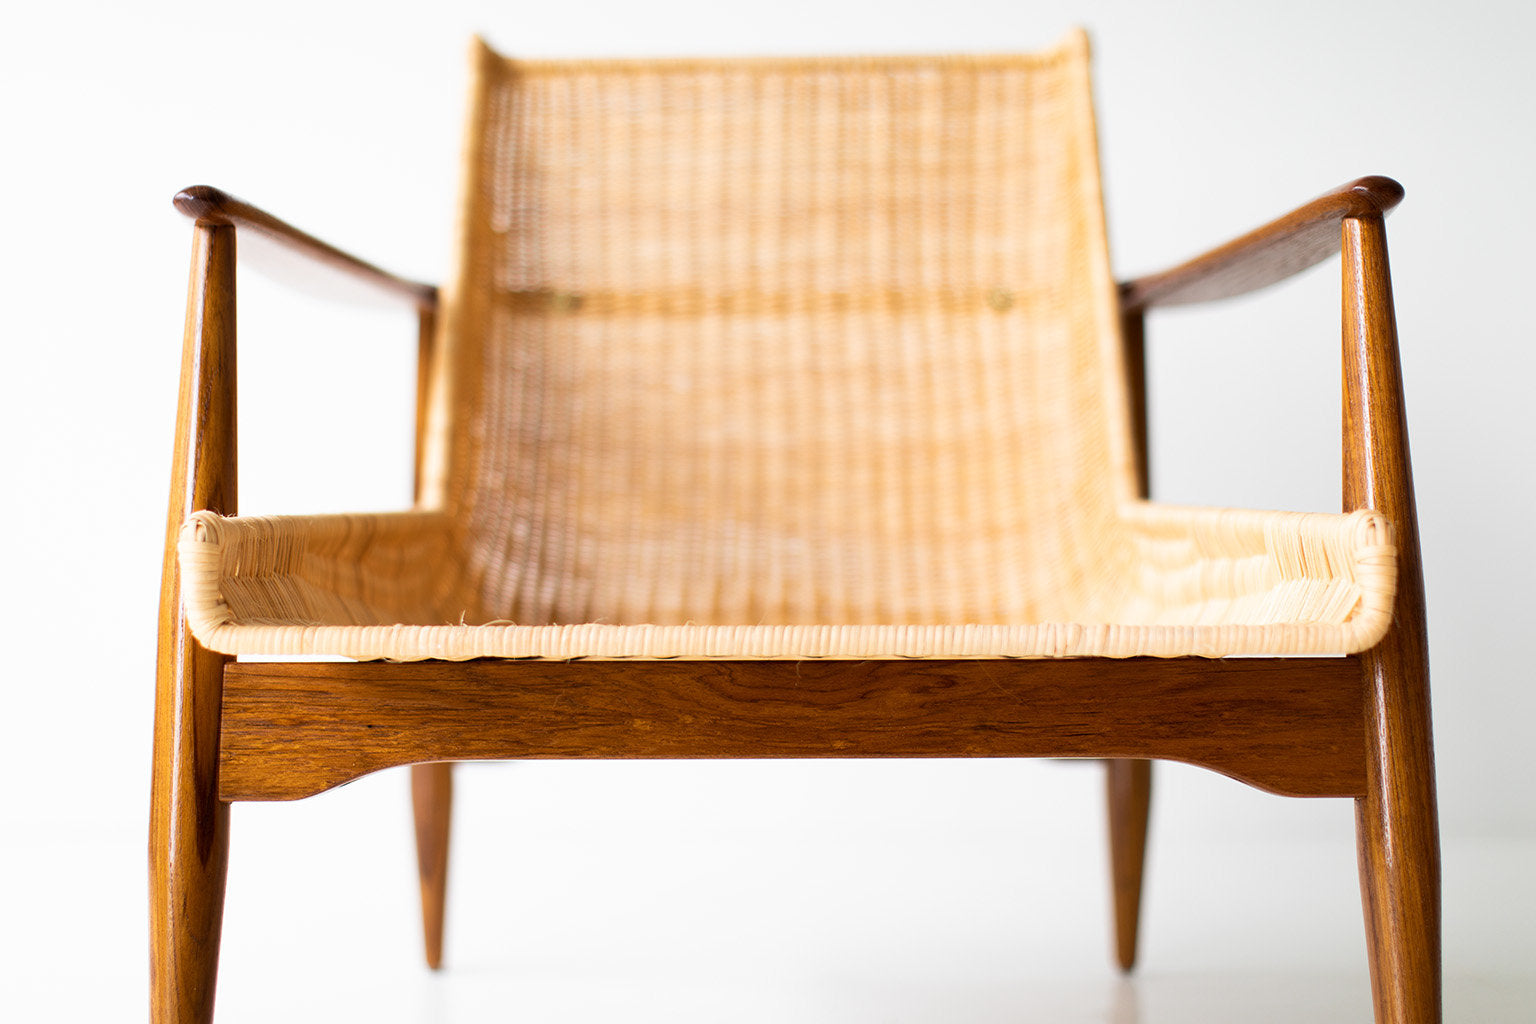 I07A4846-lawrence-peabody-wicker-lounge-chair-frame-02